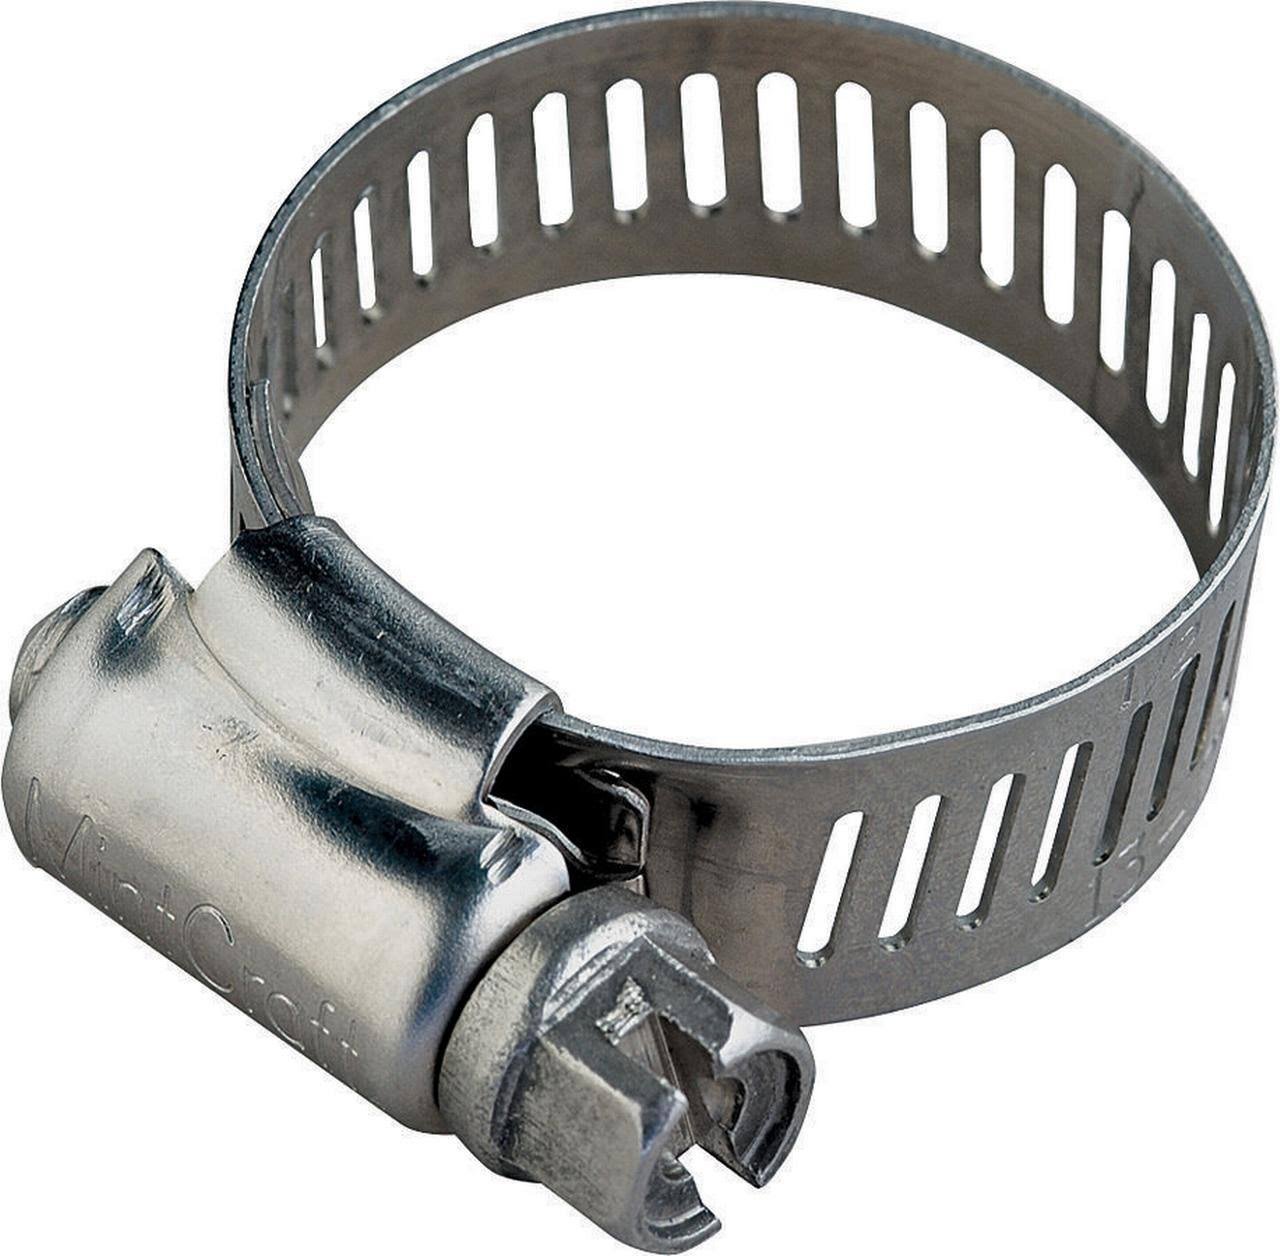 Mintcraft Hcran80 Hose Clamp and Carb - Stainless Steel, #80